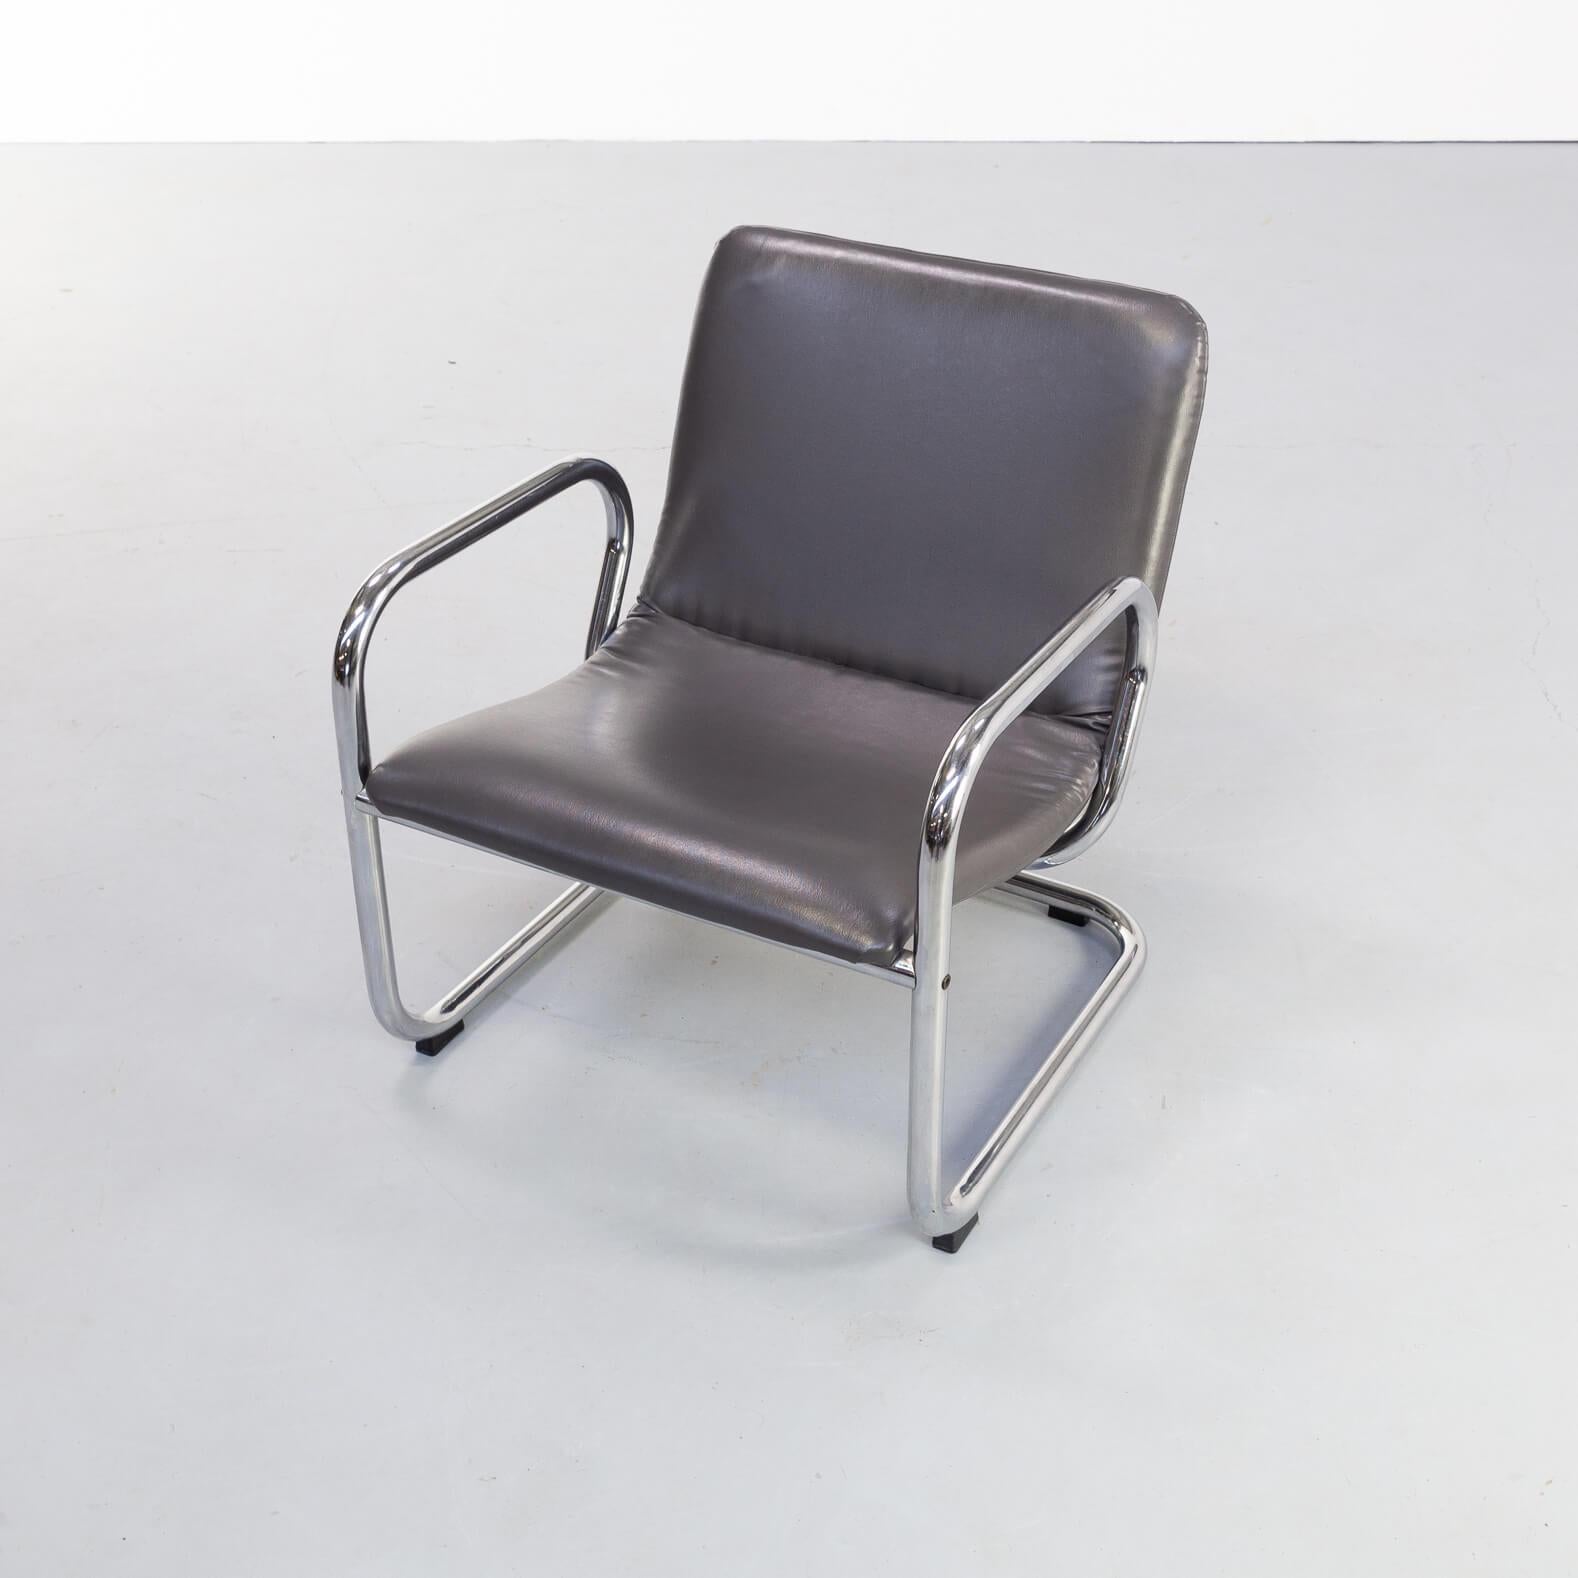 1980s Bauhaus Tubular and Leather Lounge Fauteuil In Good Condition For Sale In Amstelveen, Noord